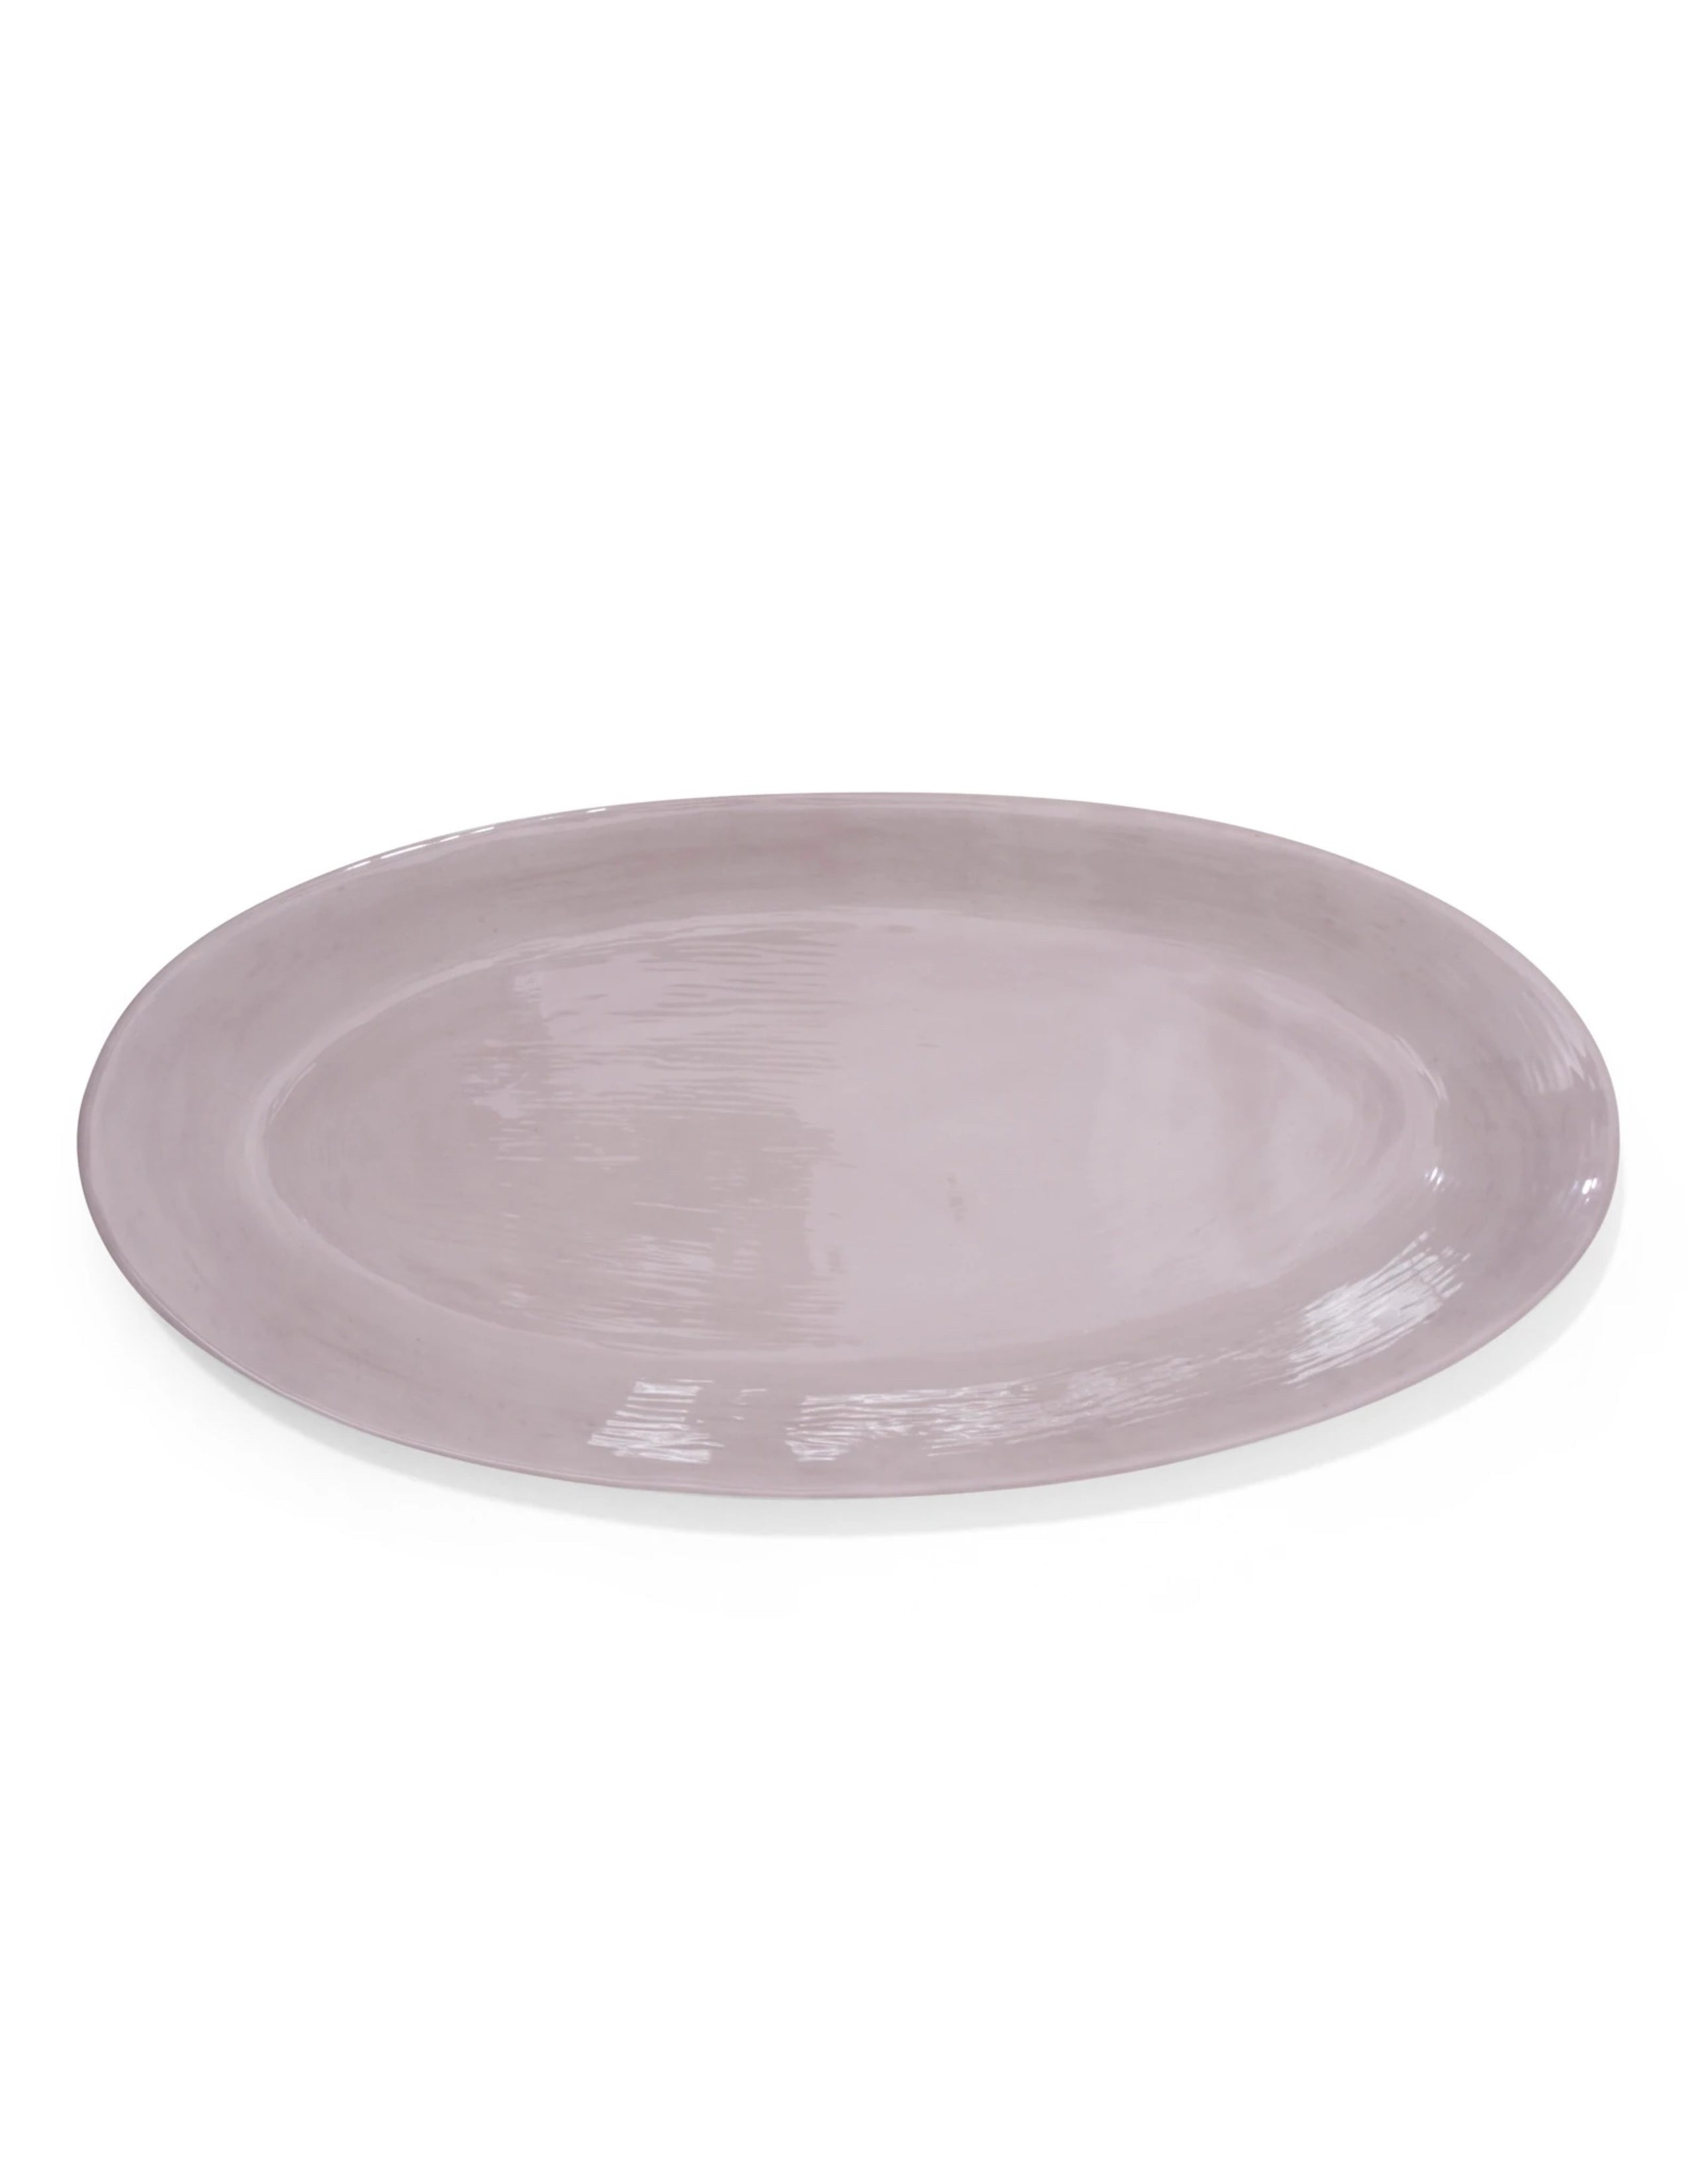 Large Oval Platter - Taupe